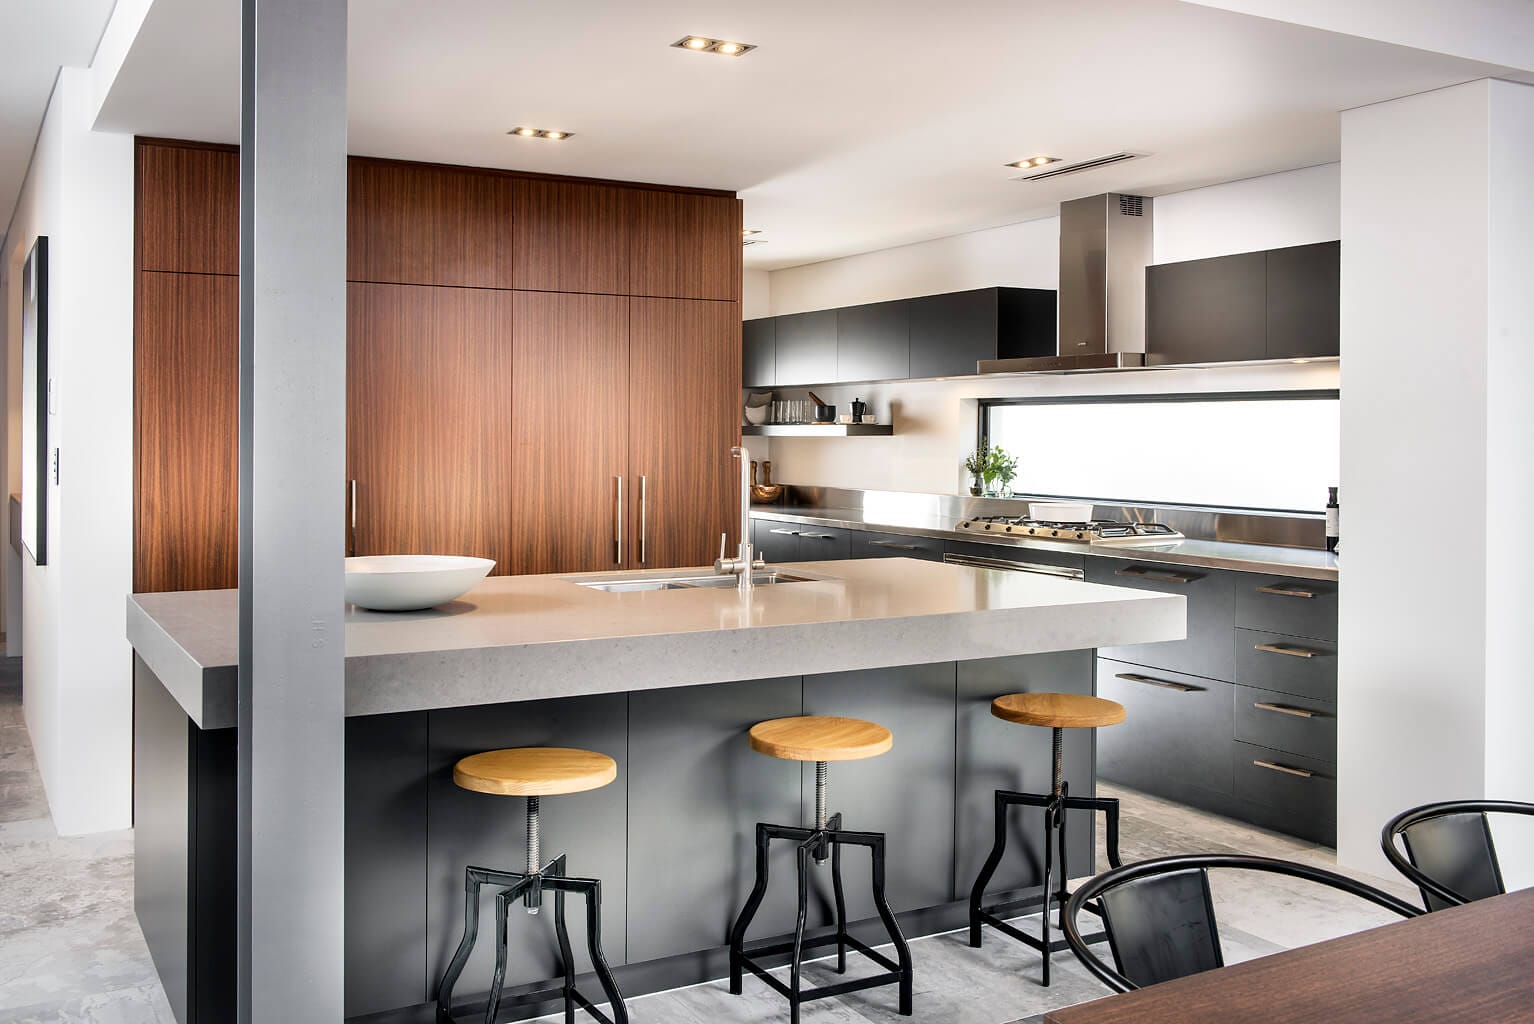 Industrial Inspiration For Your Kitchen Renovations Perth